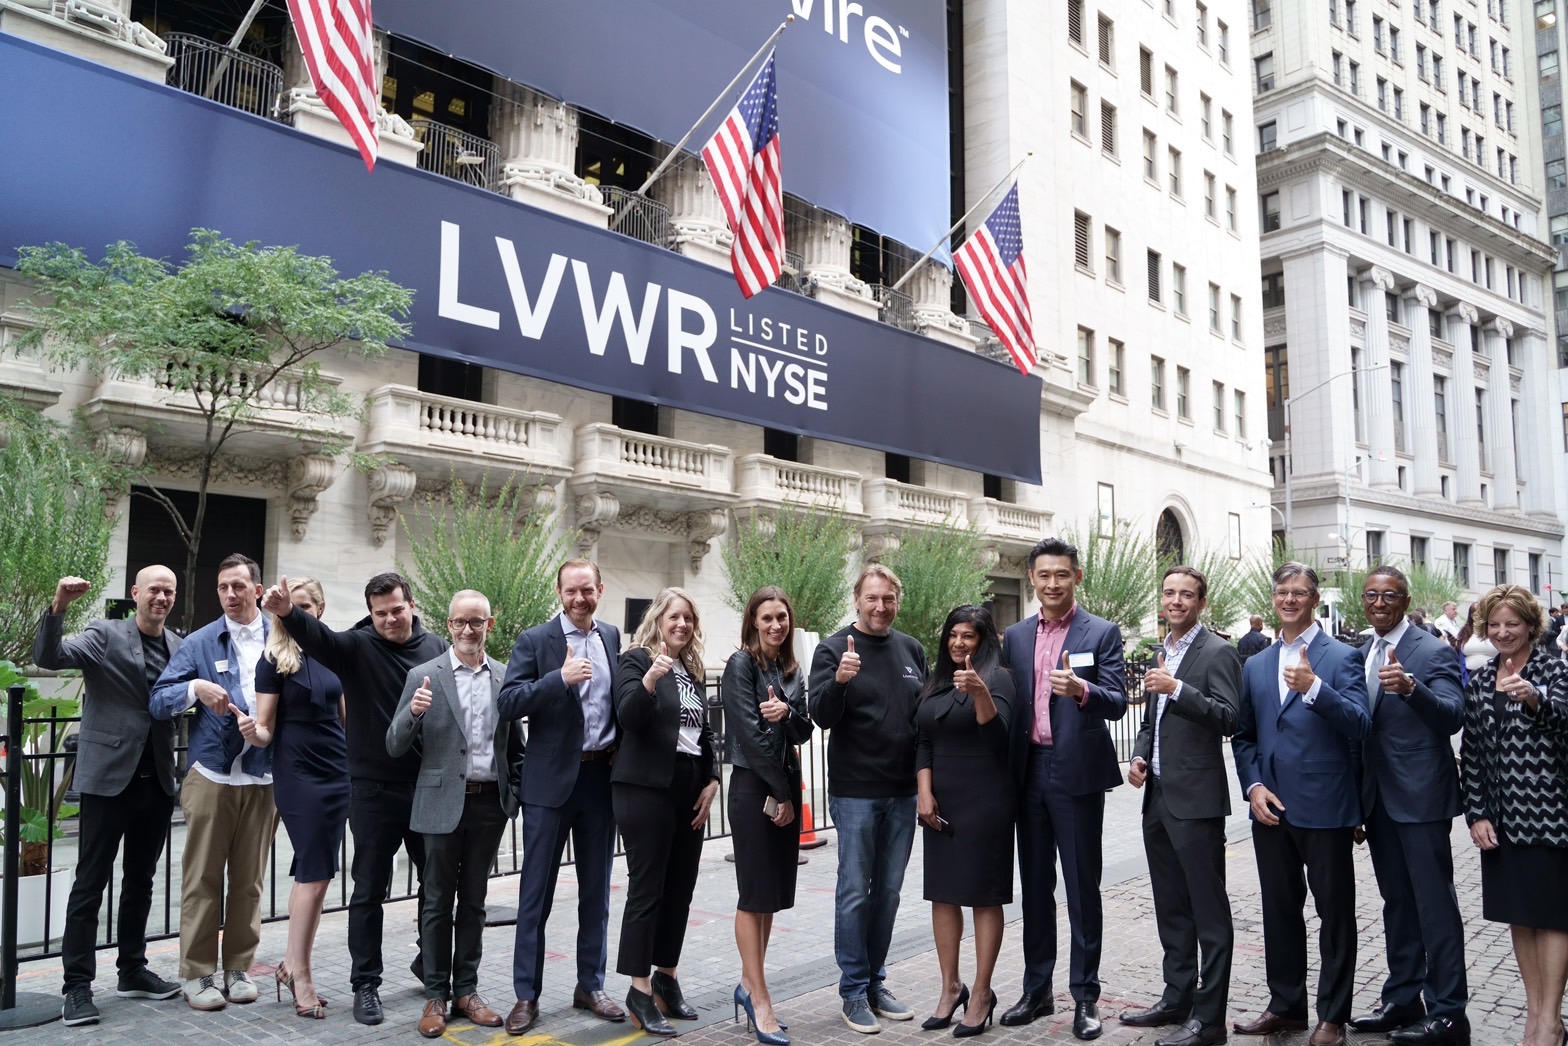 group photo celebrating LiveWire's listing on the New York Stock Exchange